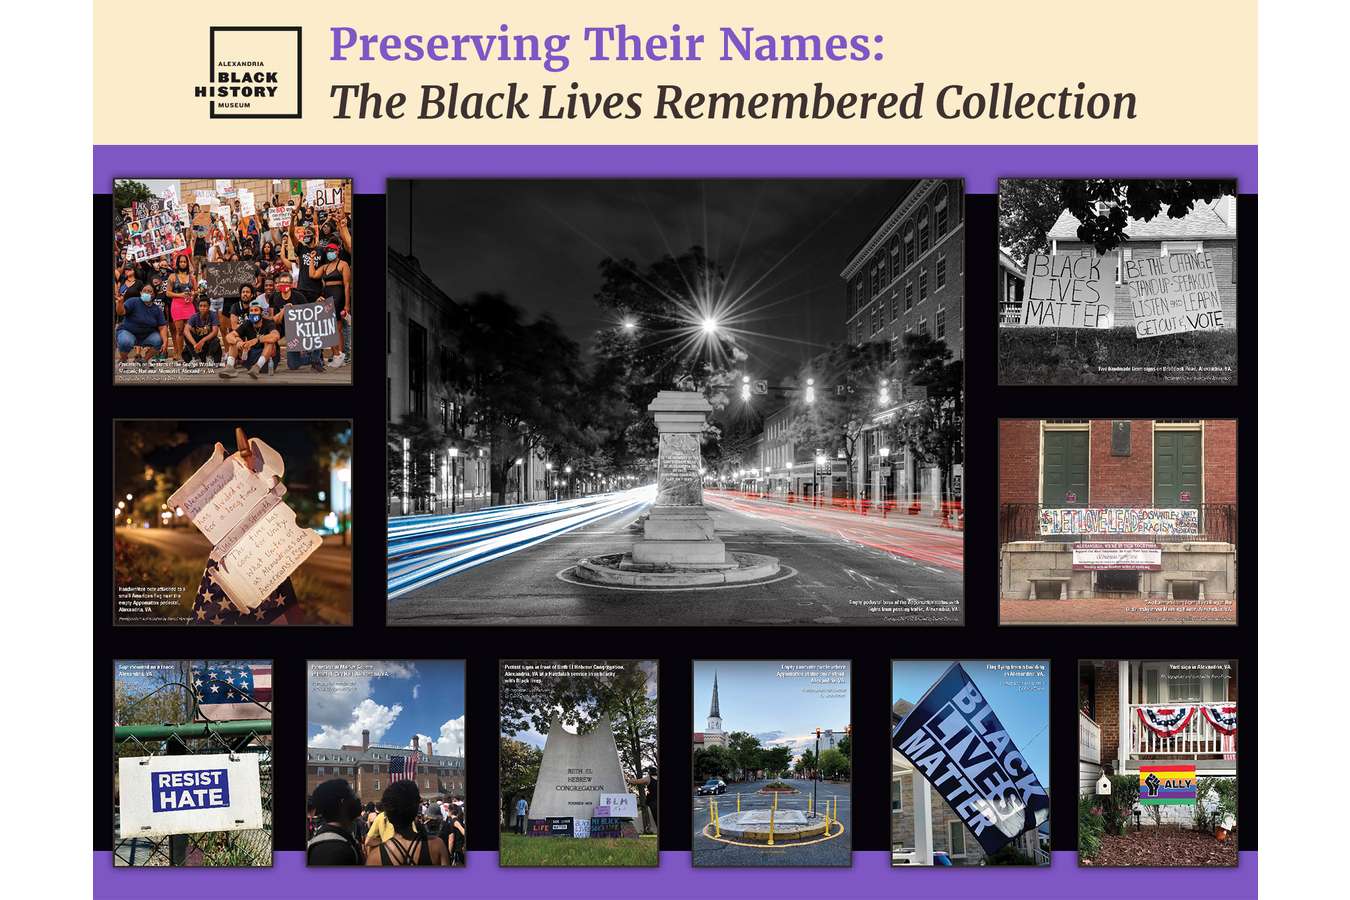 1 BLRC Title : Black Lives Remembered Collection at the Alexandria Black History Museum embodies the local community's response to the tragedy of George Floyd and the continued fight for racial equality.